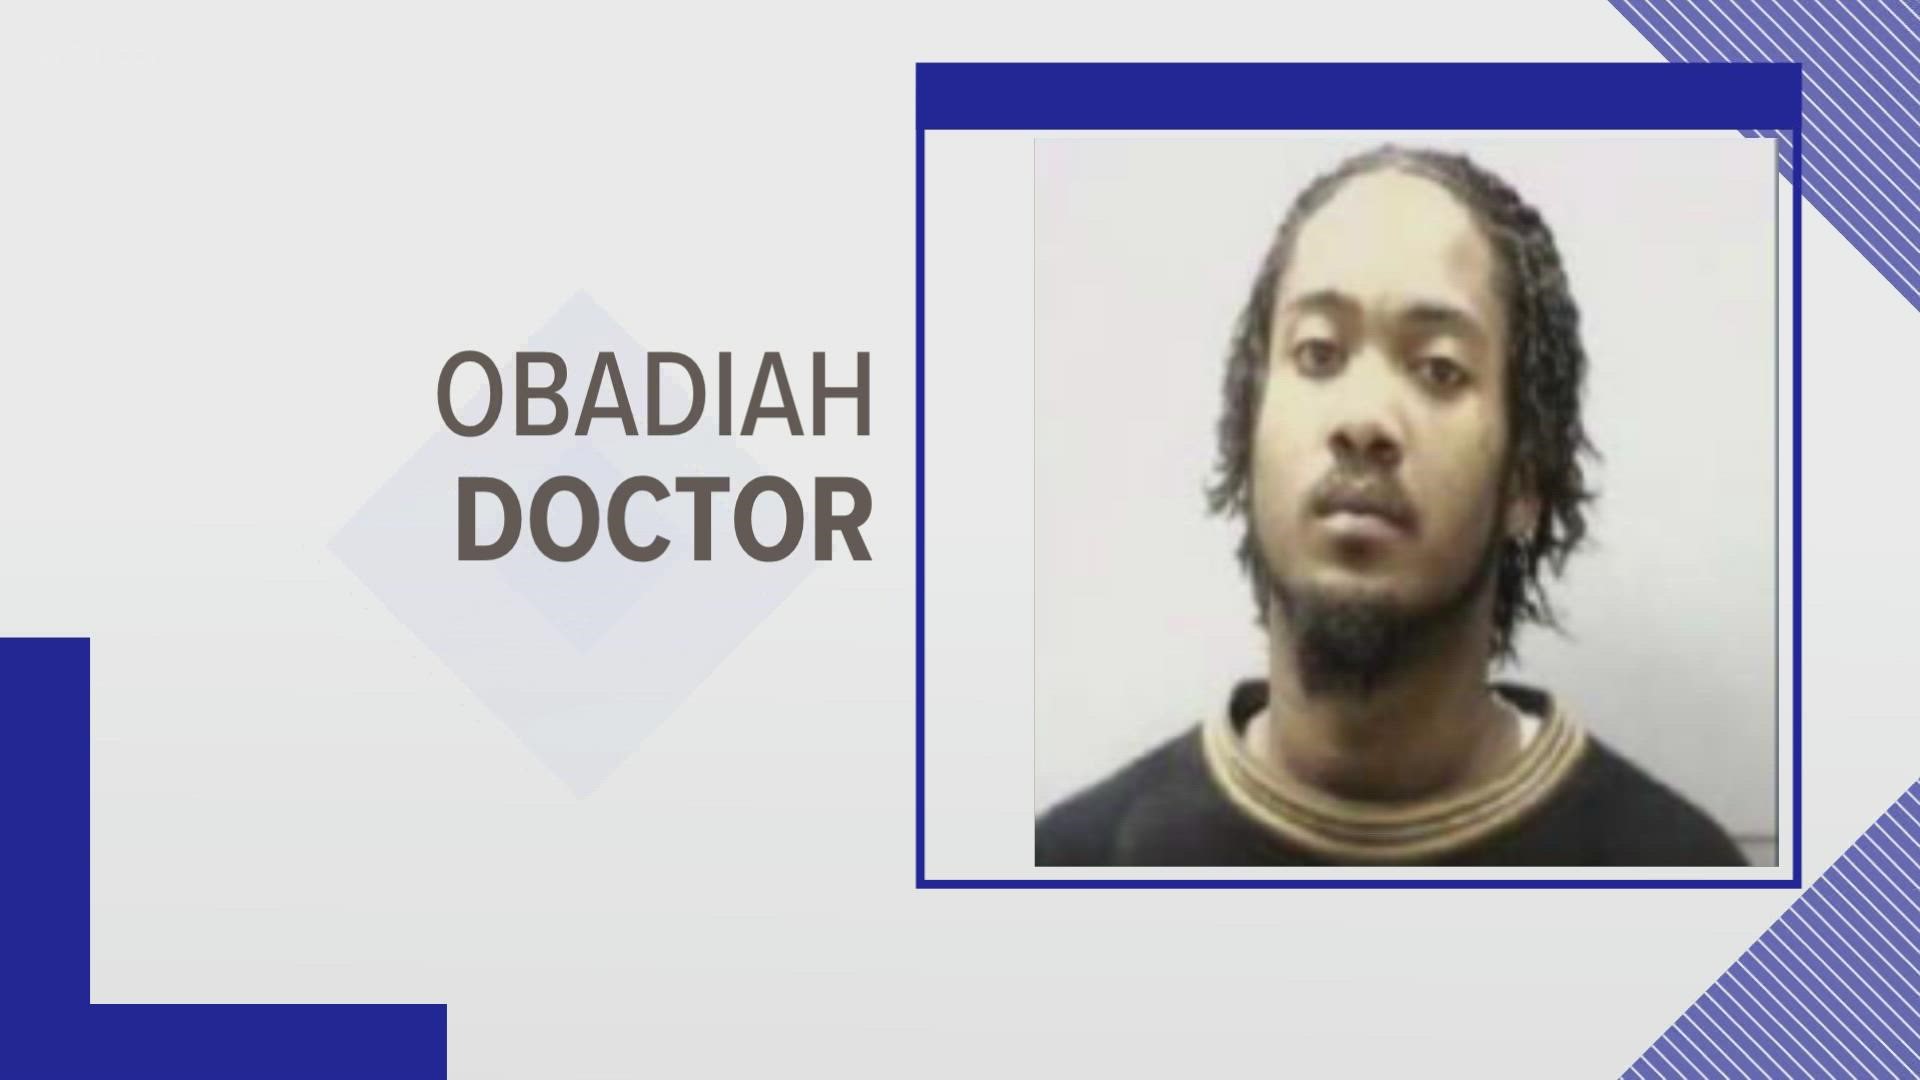 Columbia Police and U.S. Marshals are asking for help to find Obadiah Doctor, who they say should be considered armed and dangerous.